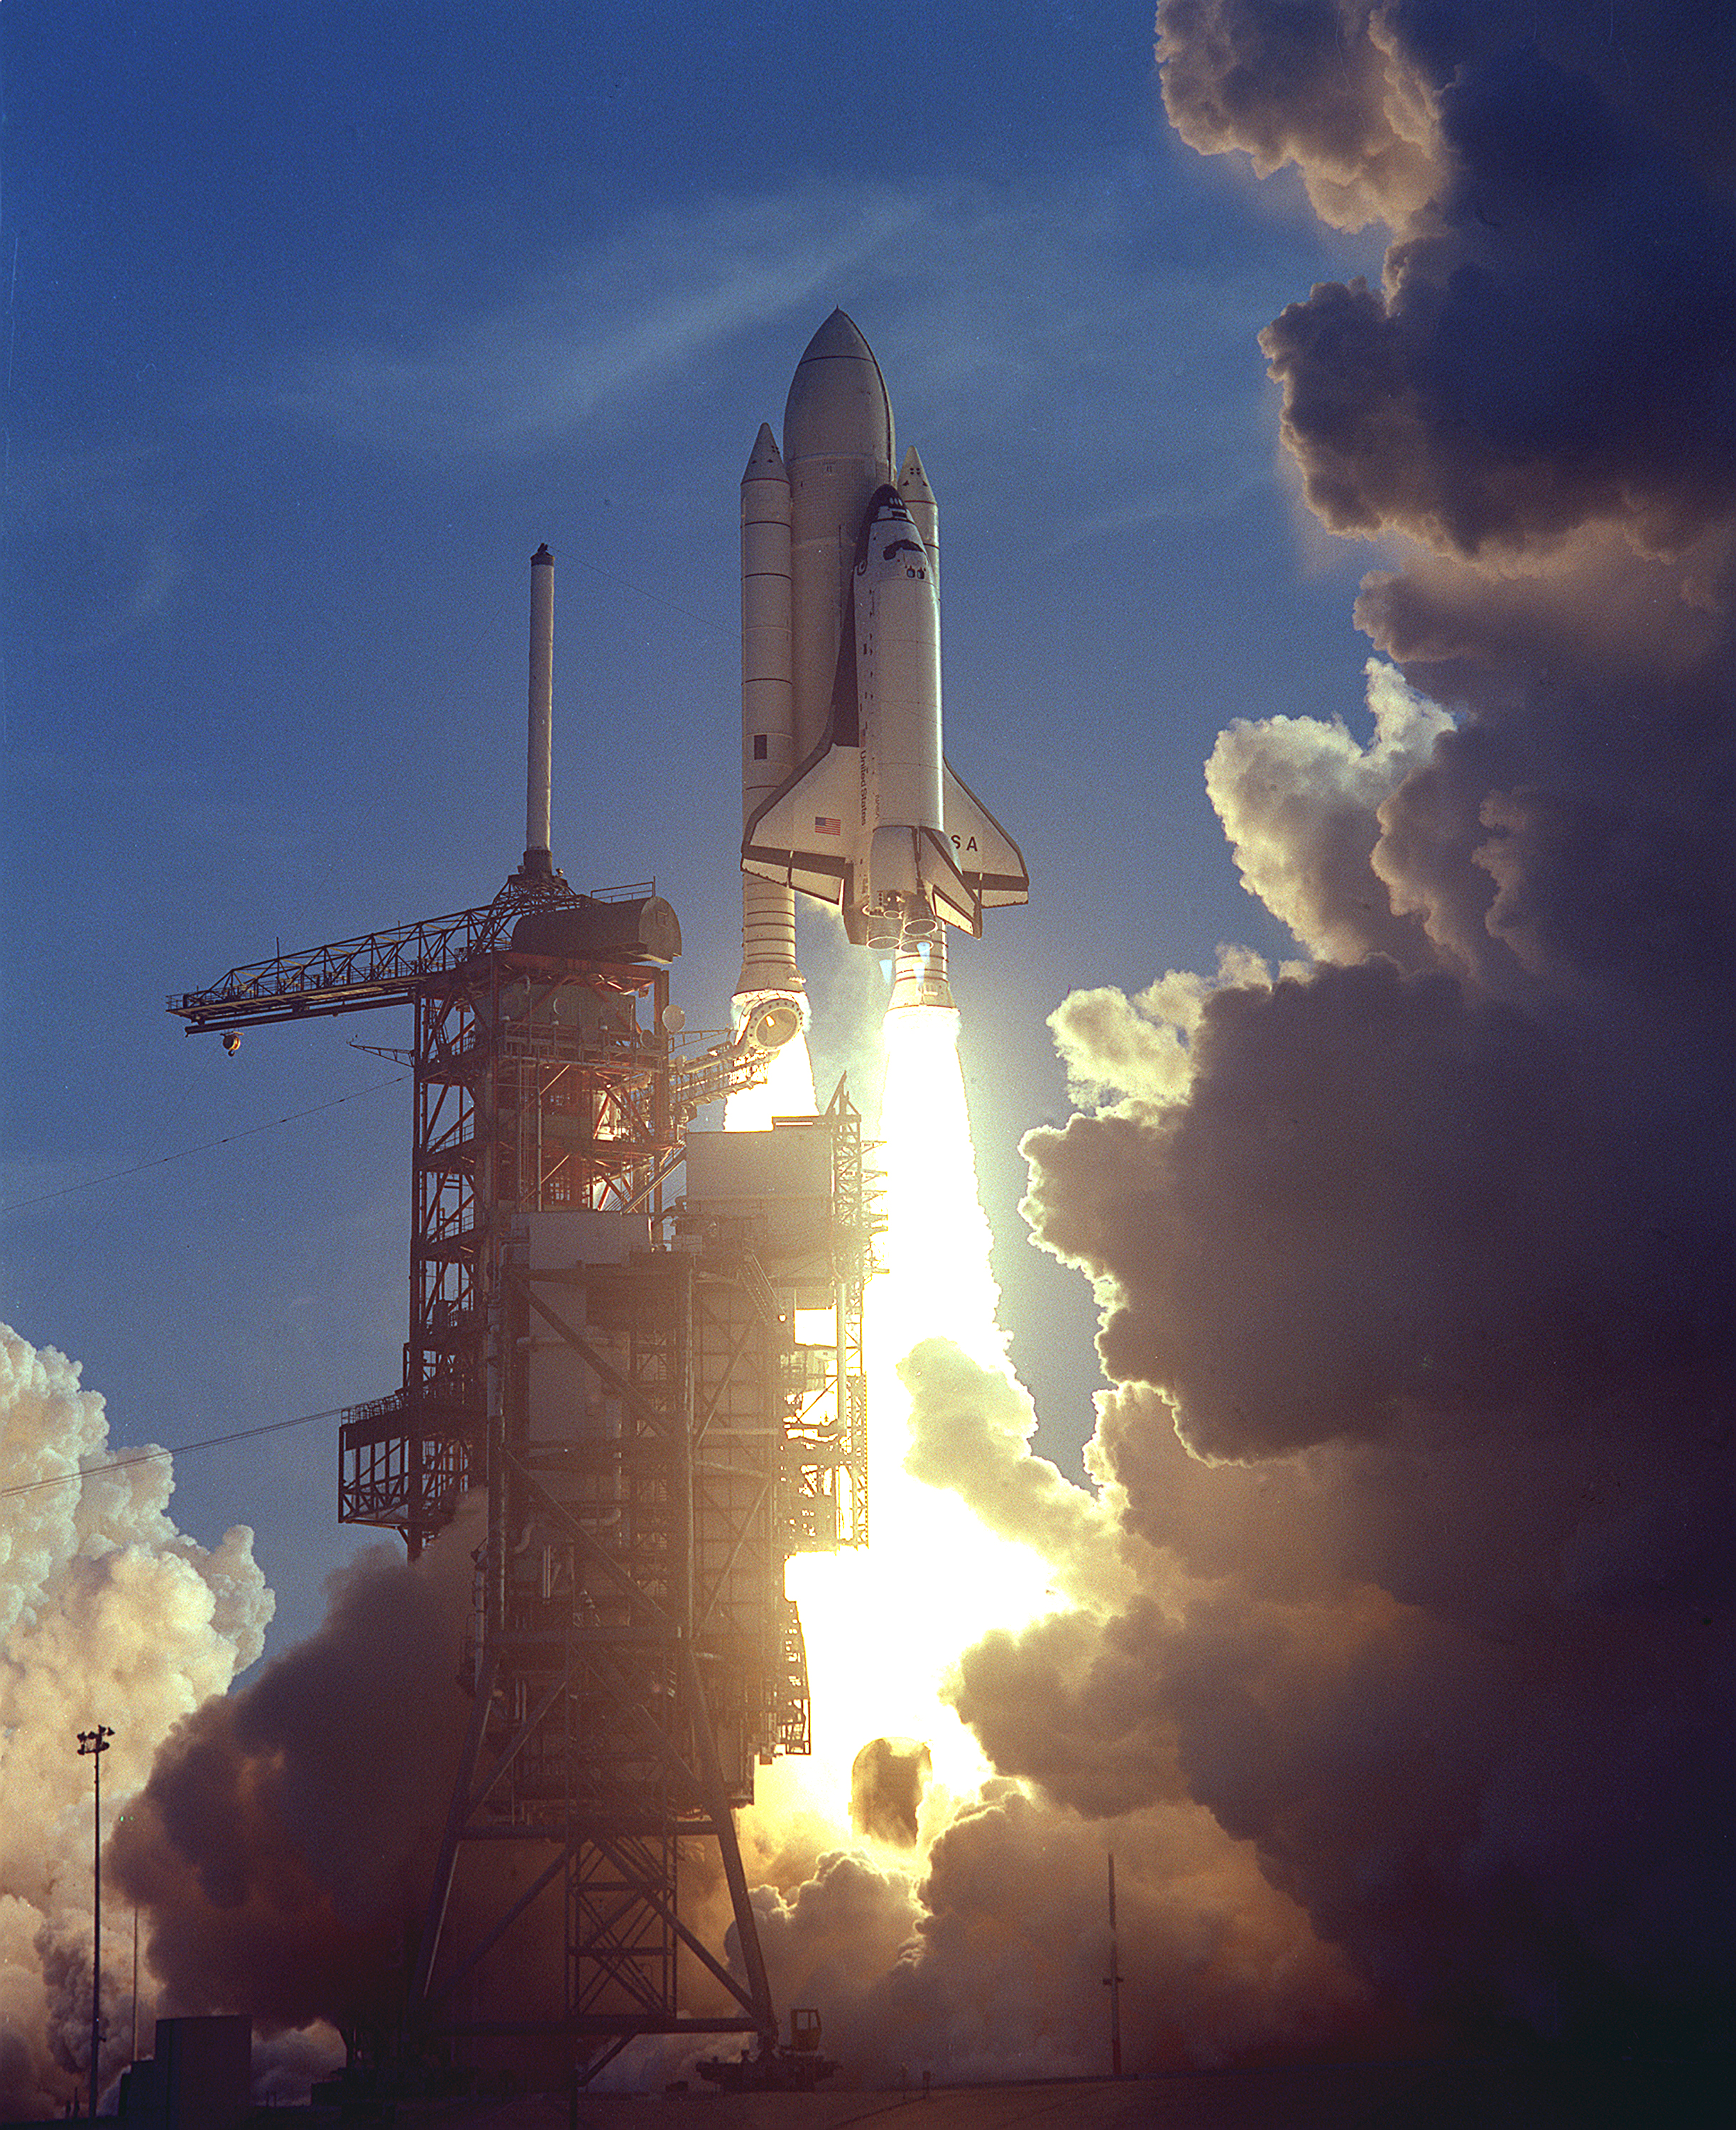 The first space shuttle takes off from a launch pad. White clouds billow upward, obscuring the rightmost third of the image. Bright flames pour out from the rockets; in contrast, the rest of the image is dim.